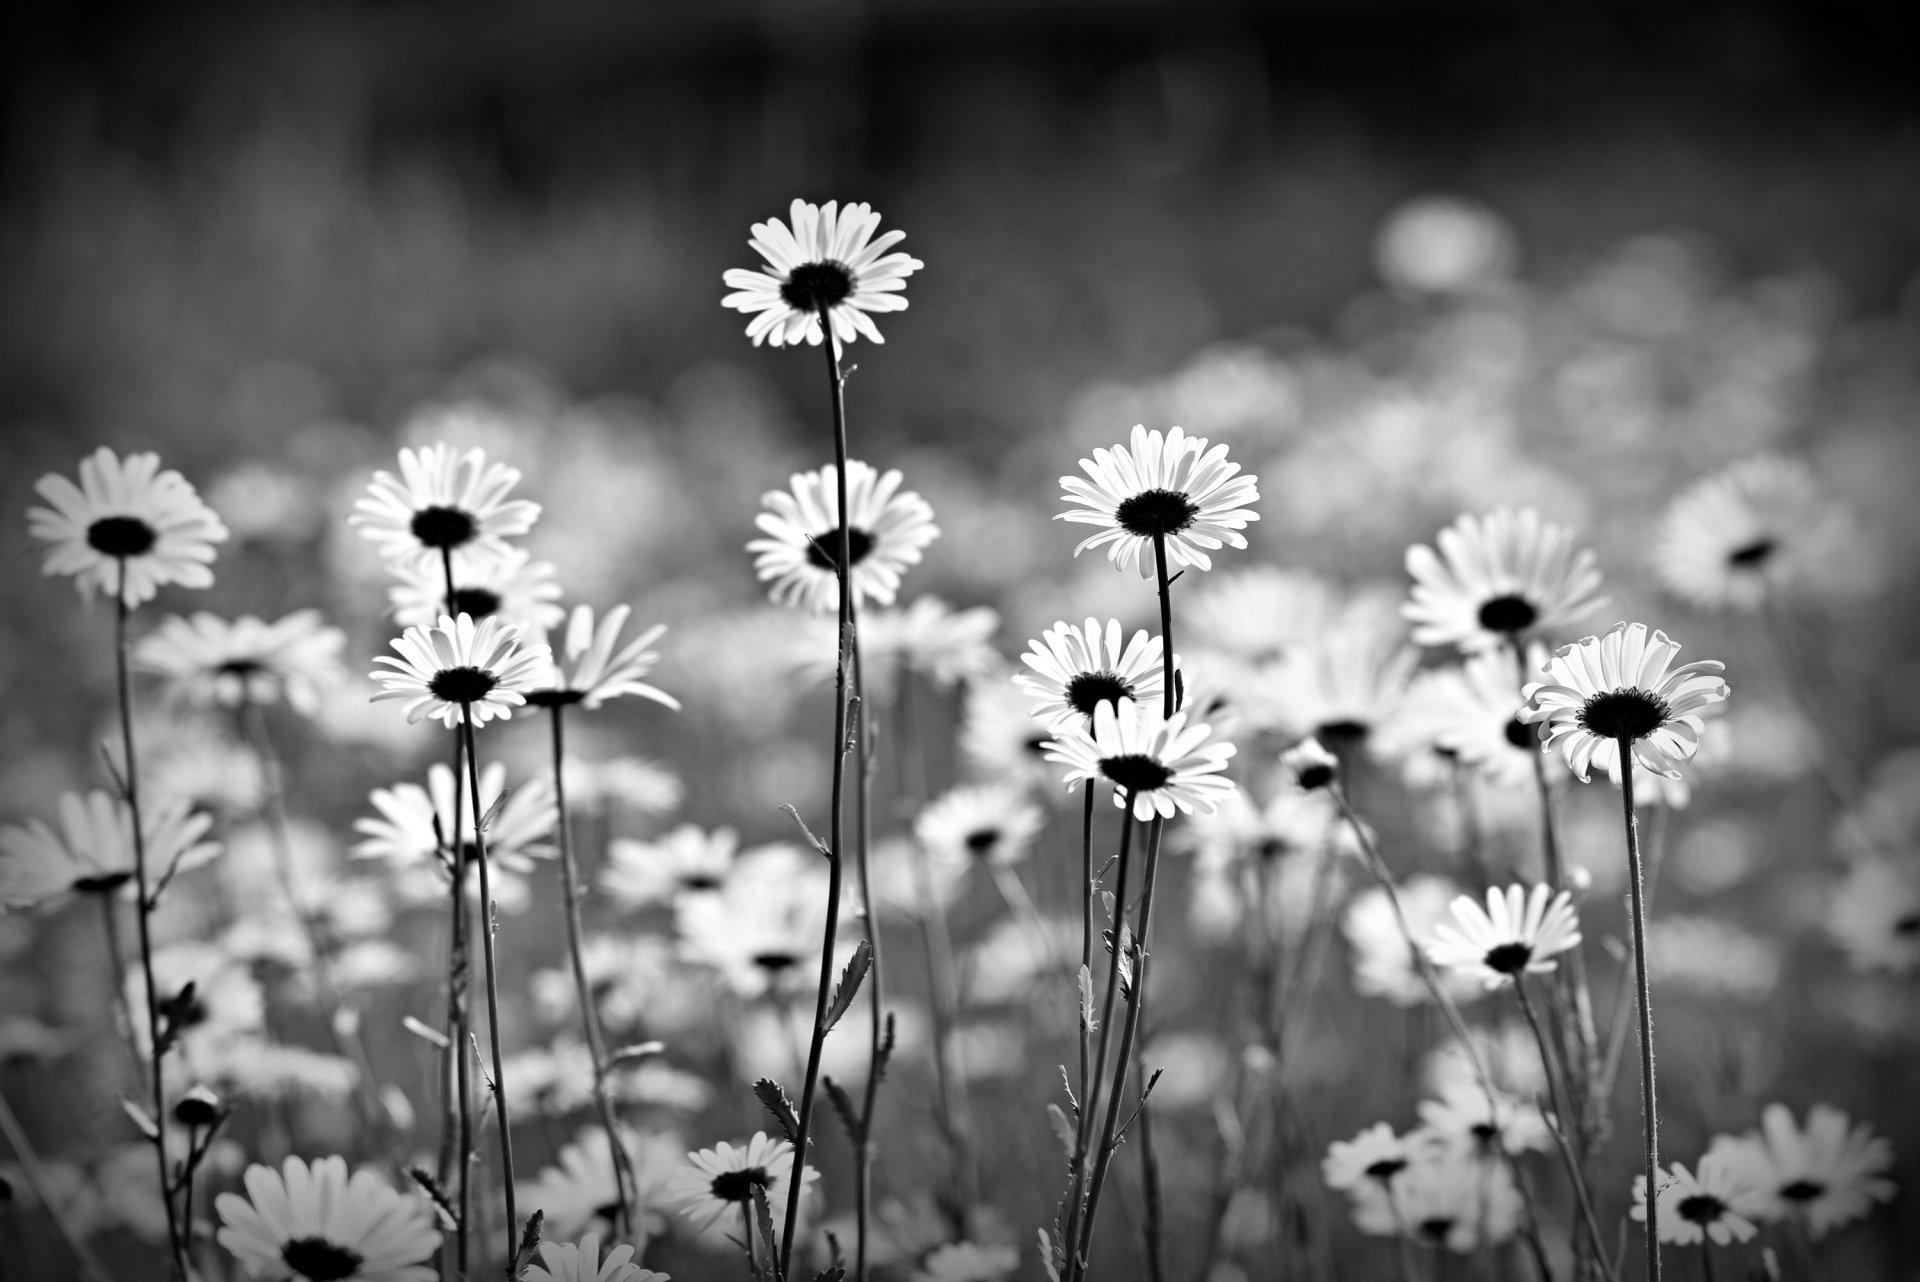 Daisy Monochrome by Mabel Amber